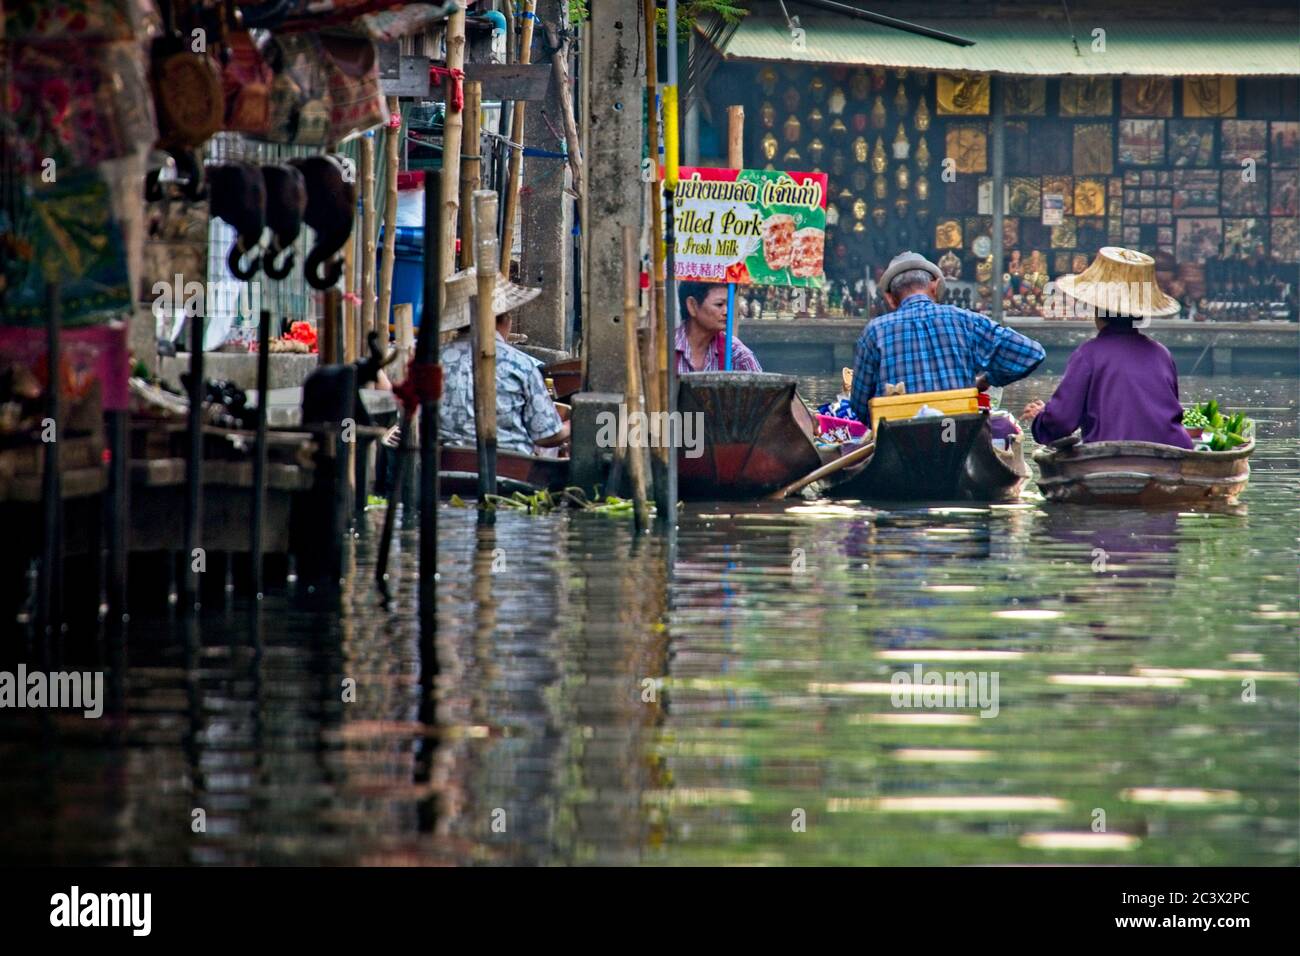 Locals at Bangkok's floating market Rear view of four boats with people Reflections in water Goods for sale in shop on left and background Landscape Stock Photo